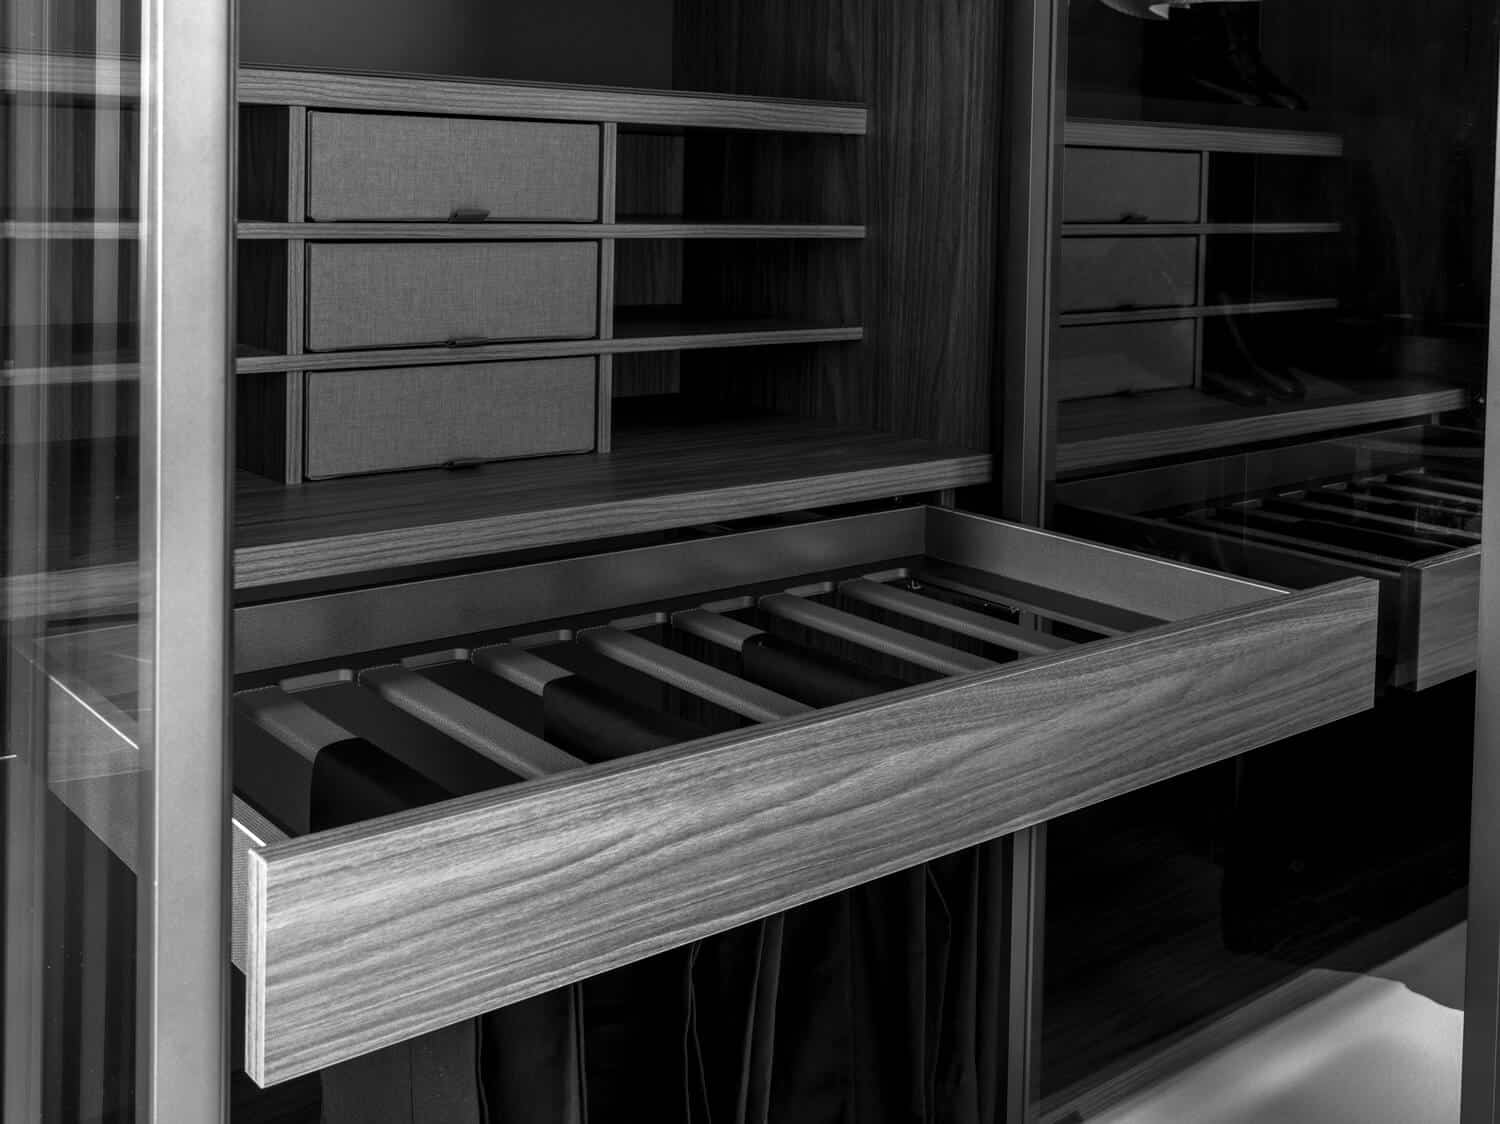 Full pull-out drawer with trousers rack. The rack features an Easy leather finish that prevents trousers from falling.